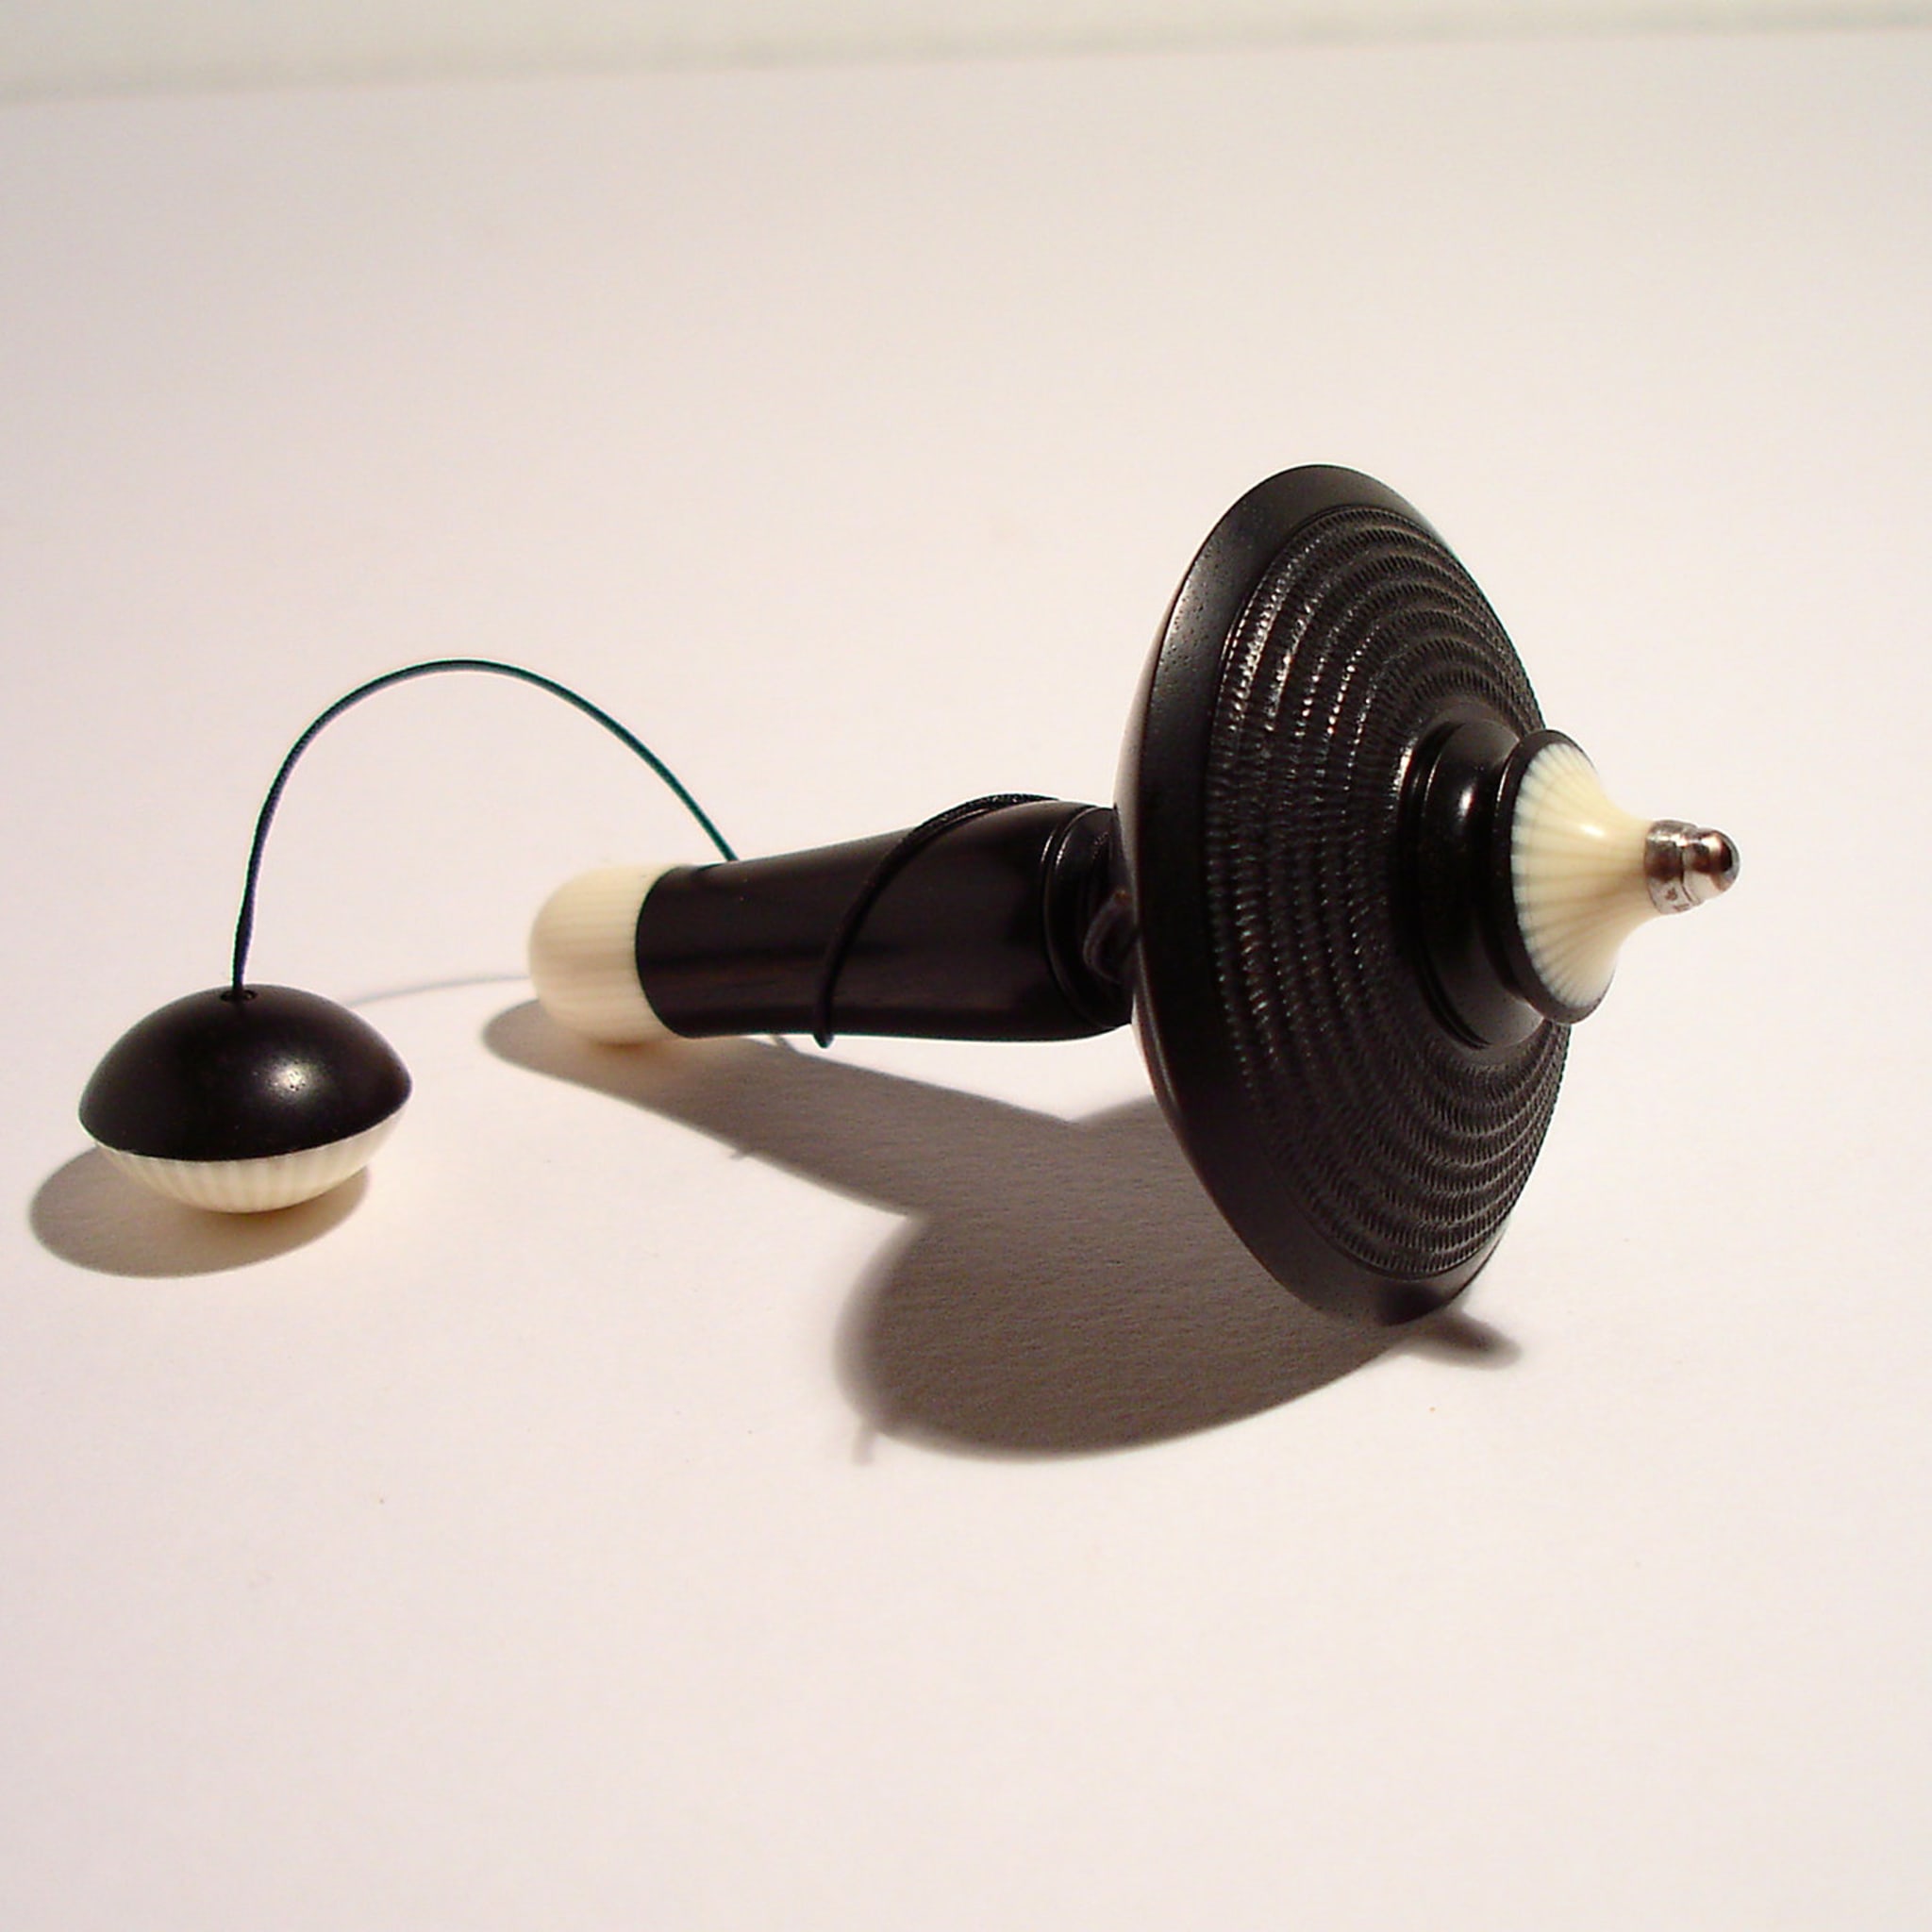 Filo Spinning Top in Ebony, Galalith and Black Palm - Alternative view 2